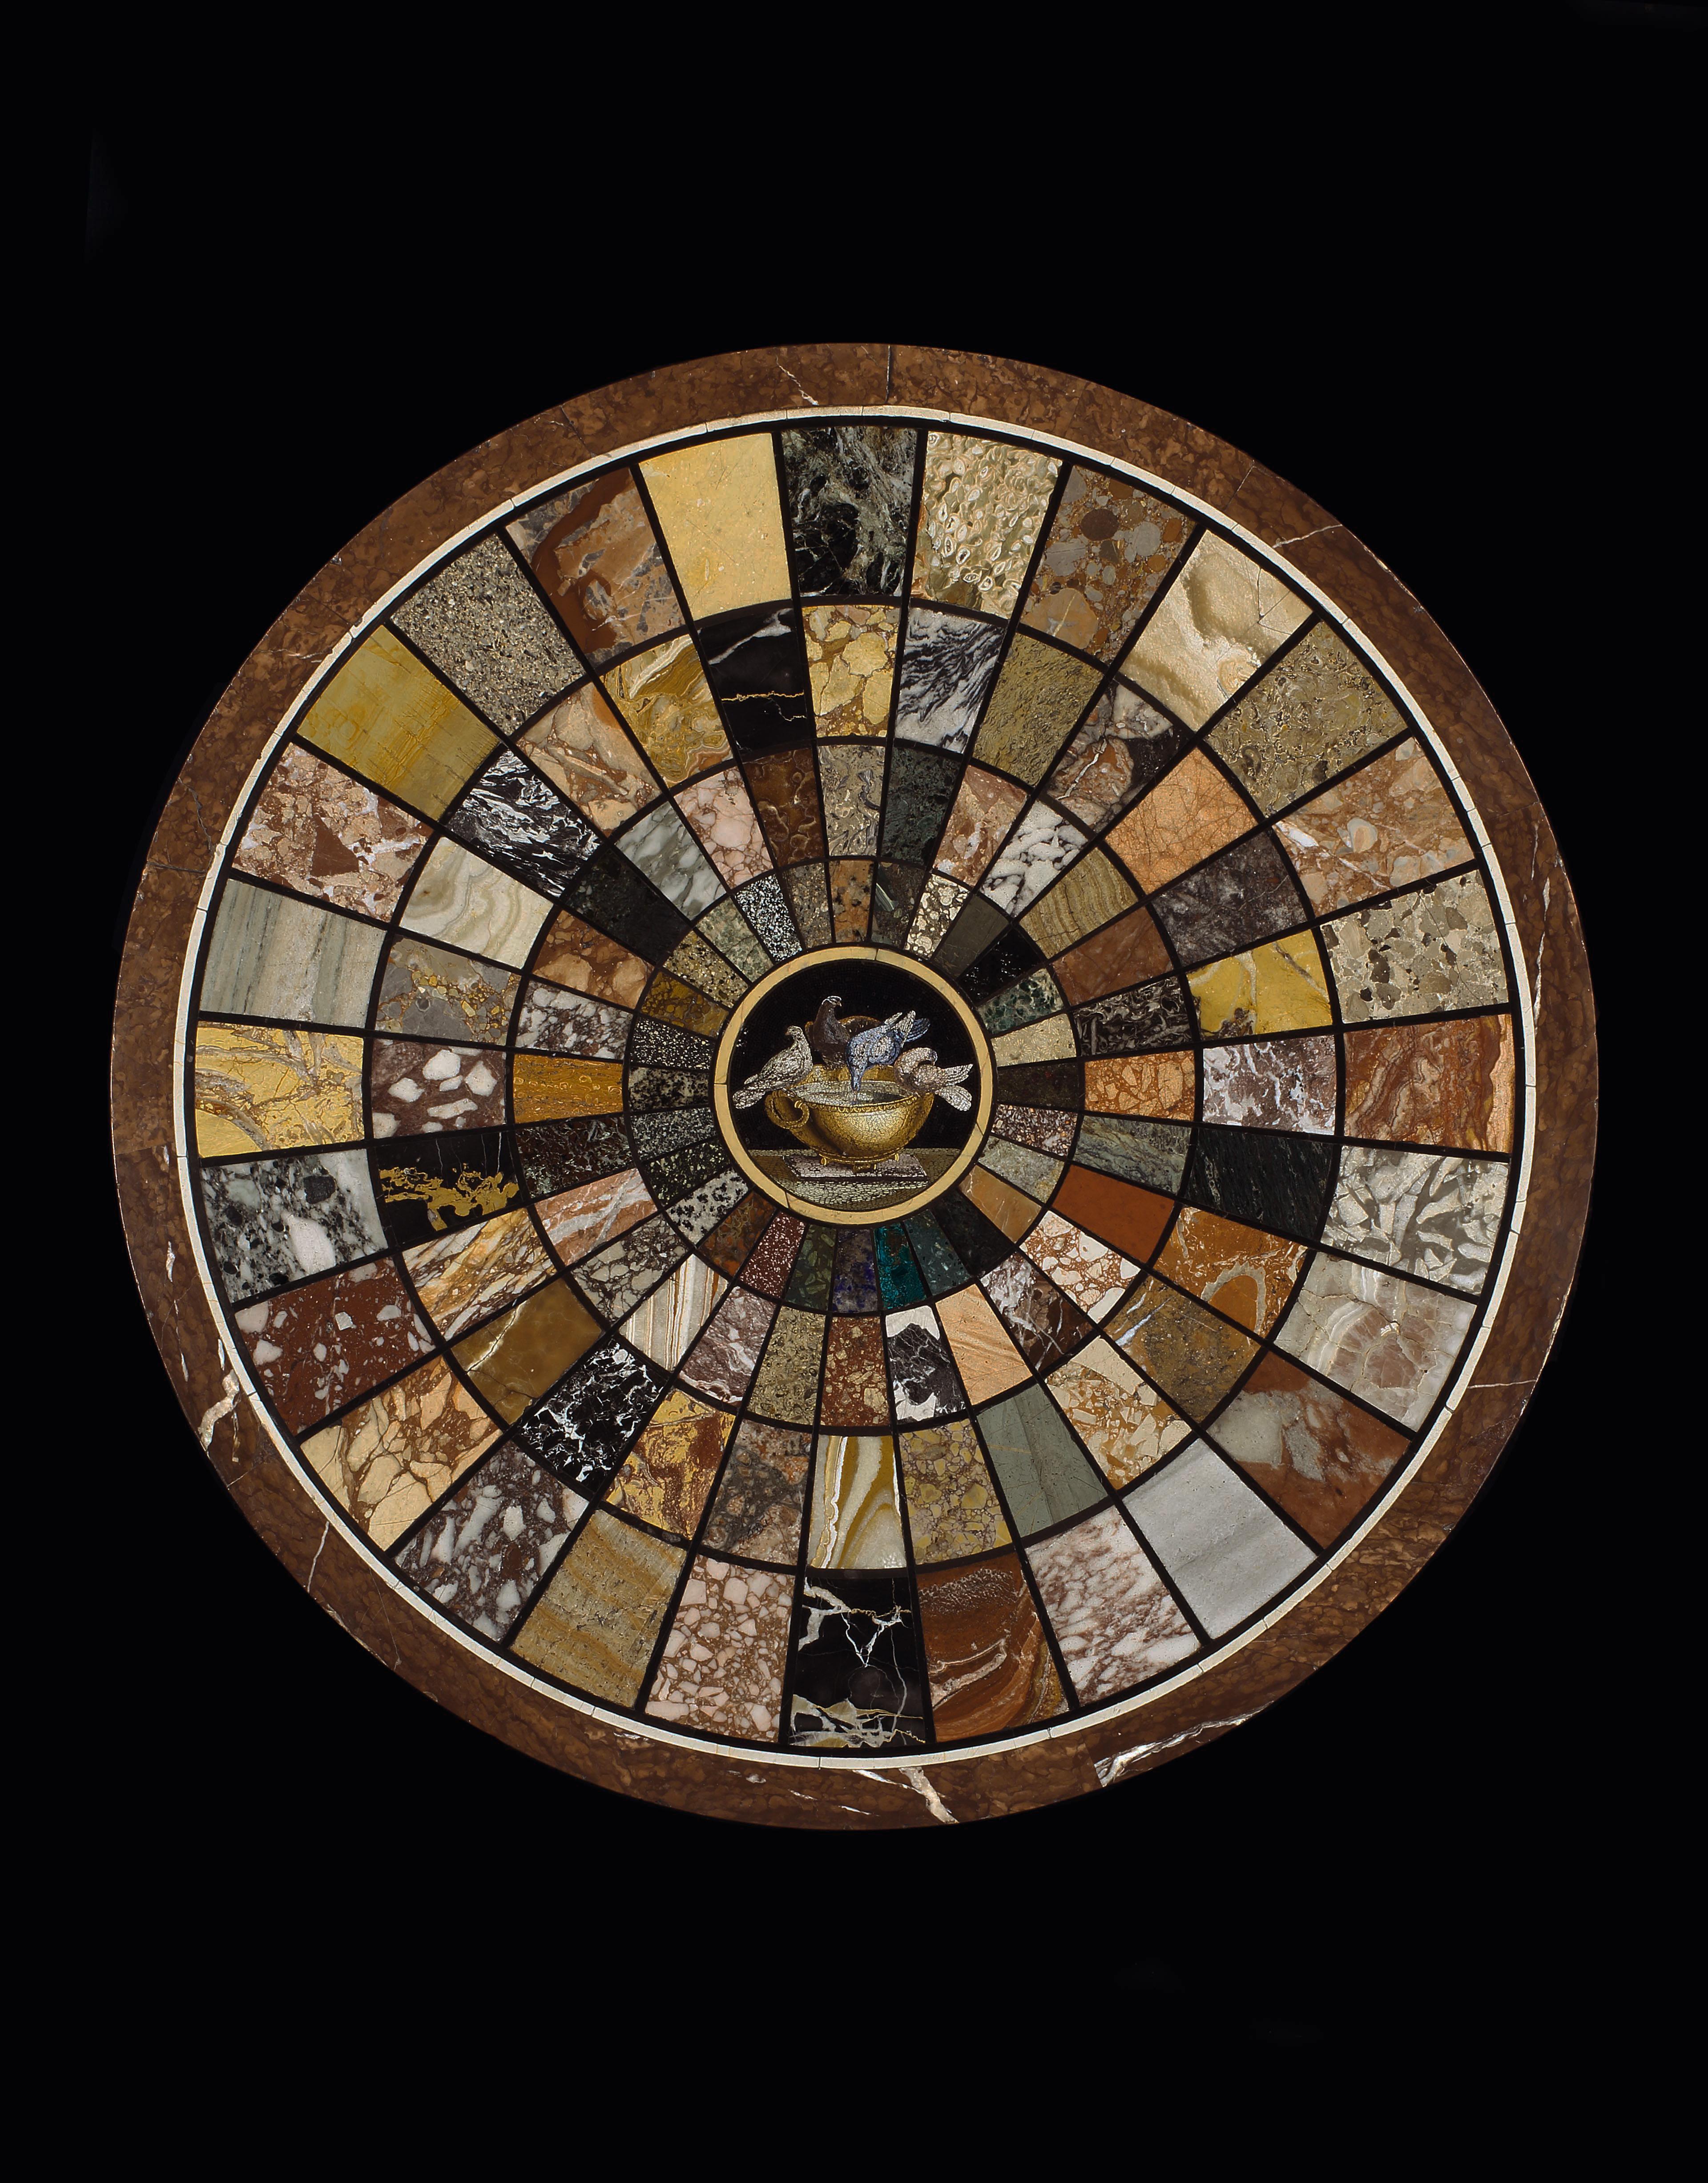 A superb Regency circular centre table, the specimen marble top inlaid with radiating panels of 112 various marbles and hard stones including Malachite, Lapis-Lazuli and Harlequin Breccia, all centred by a micro mosaic panel depicting ‘The Doves of